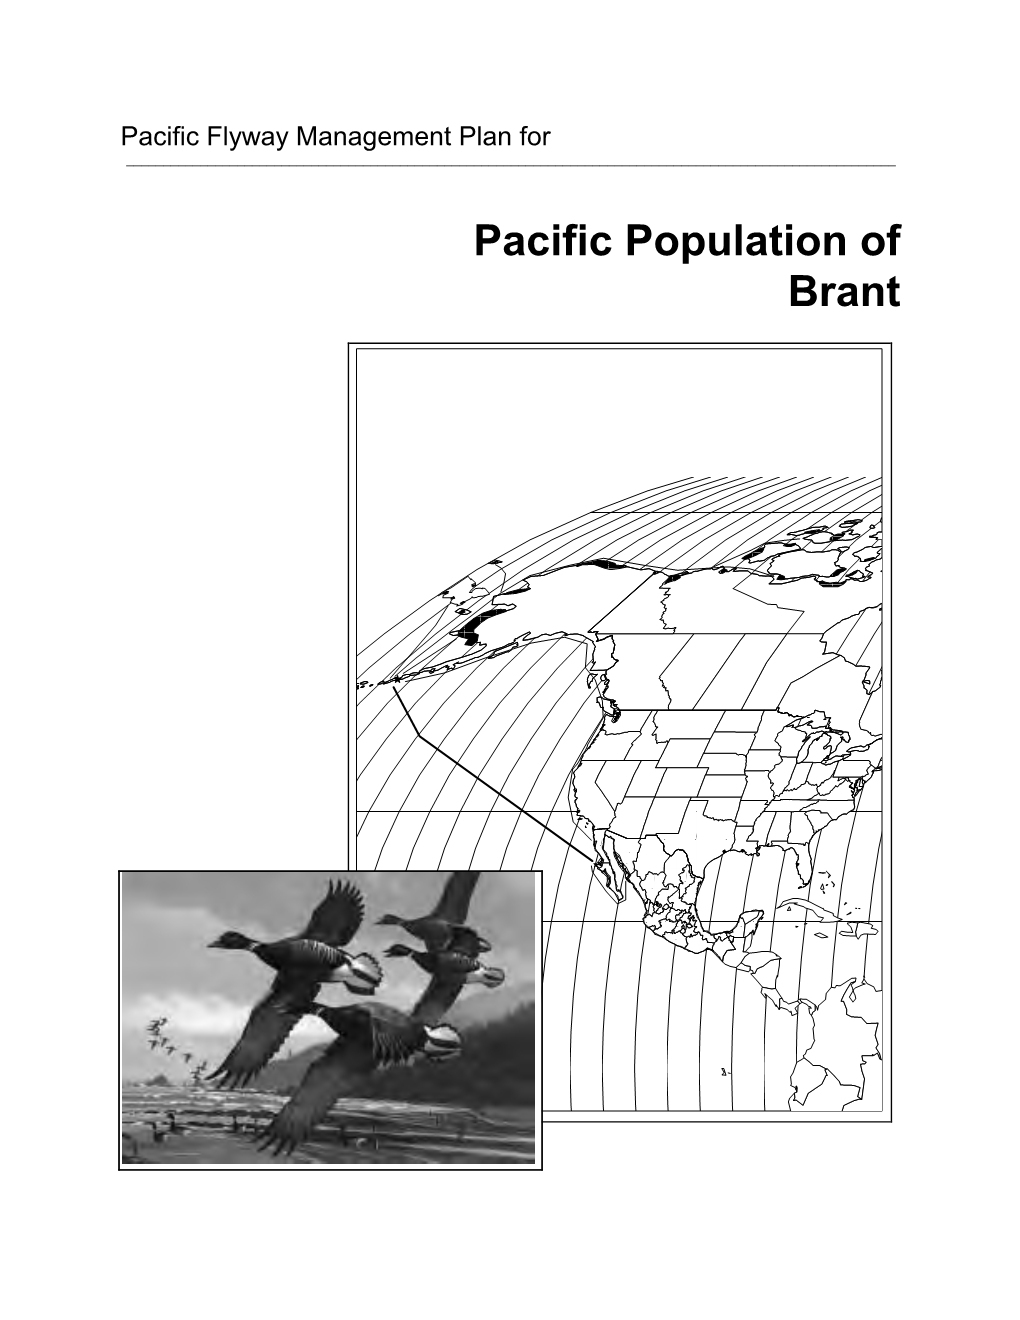 Pacific Population of Brant